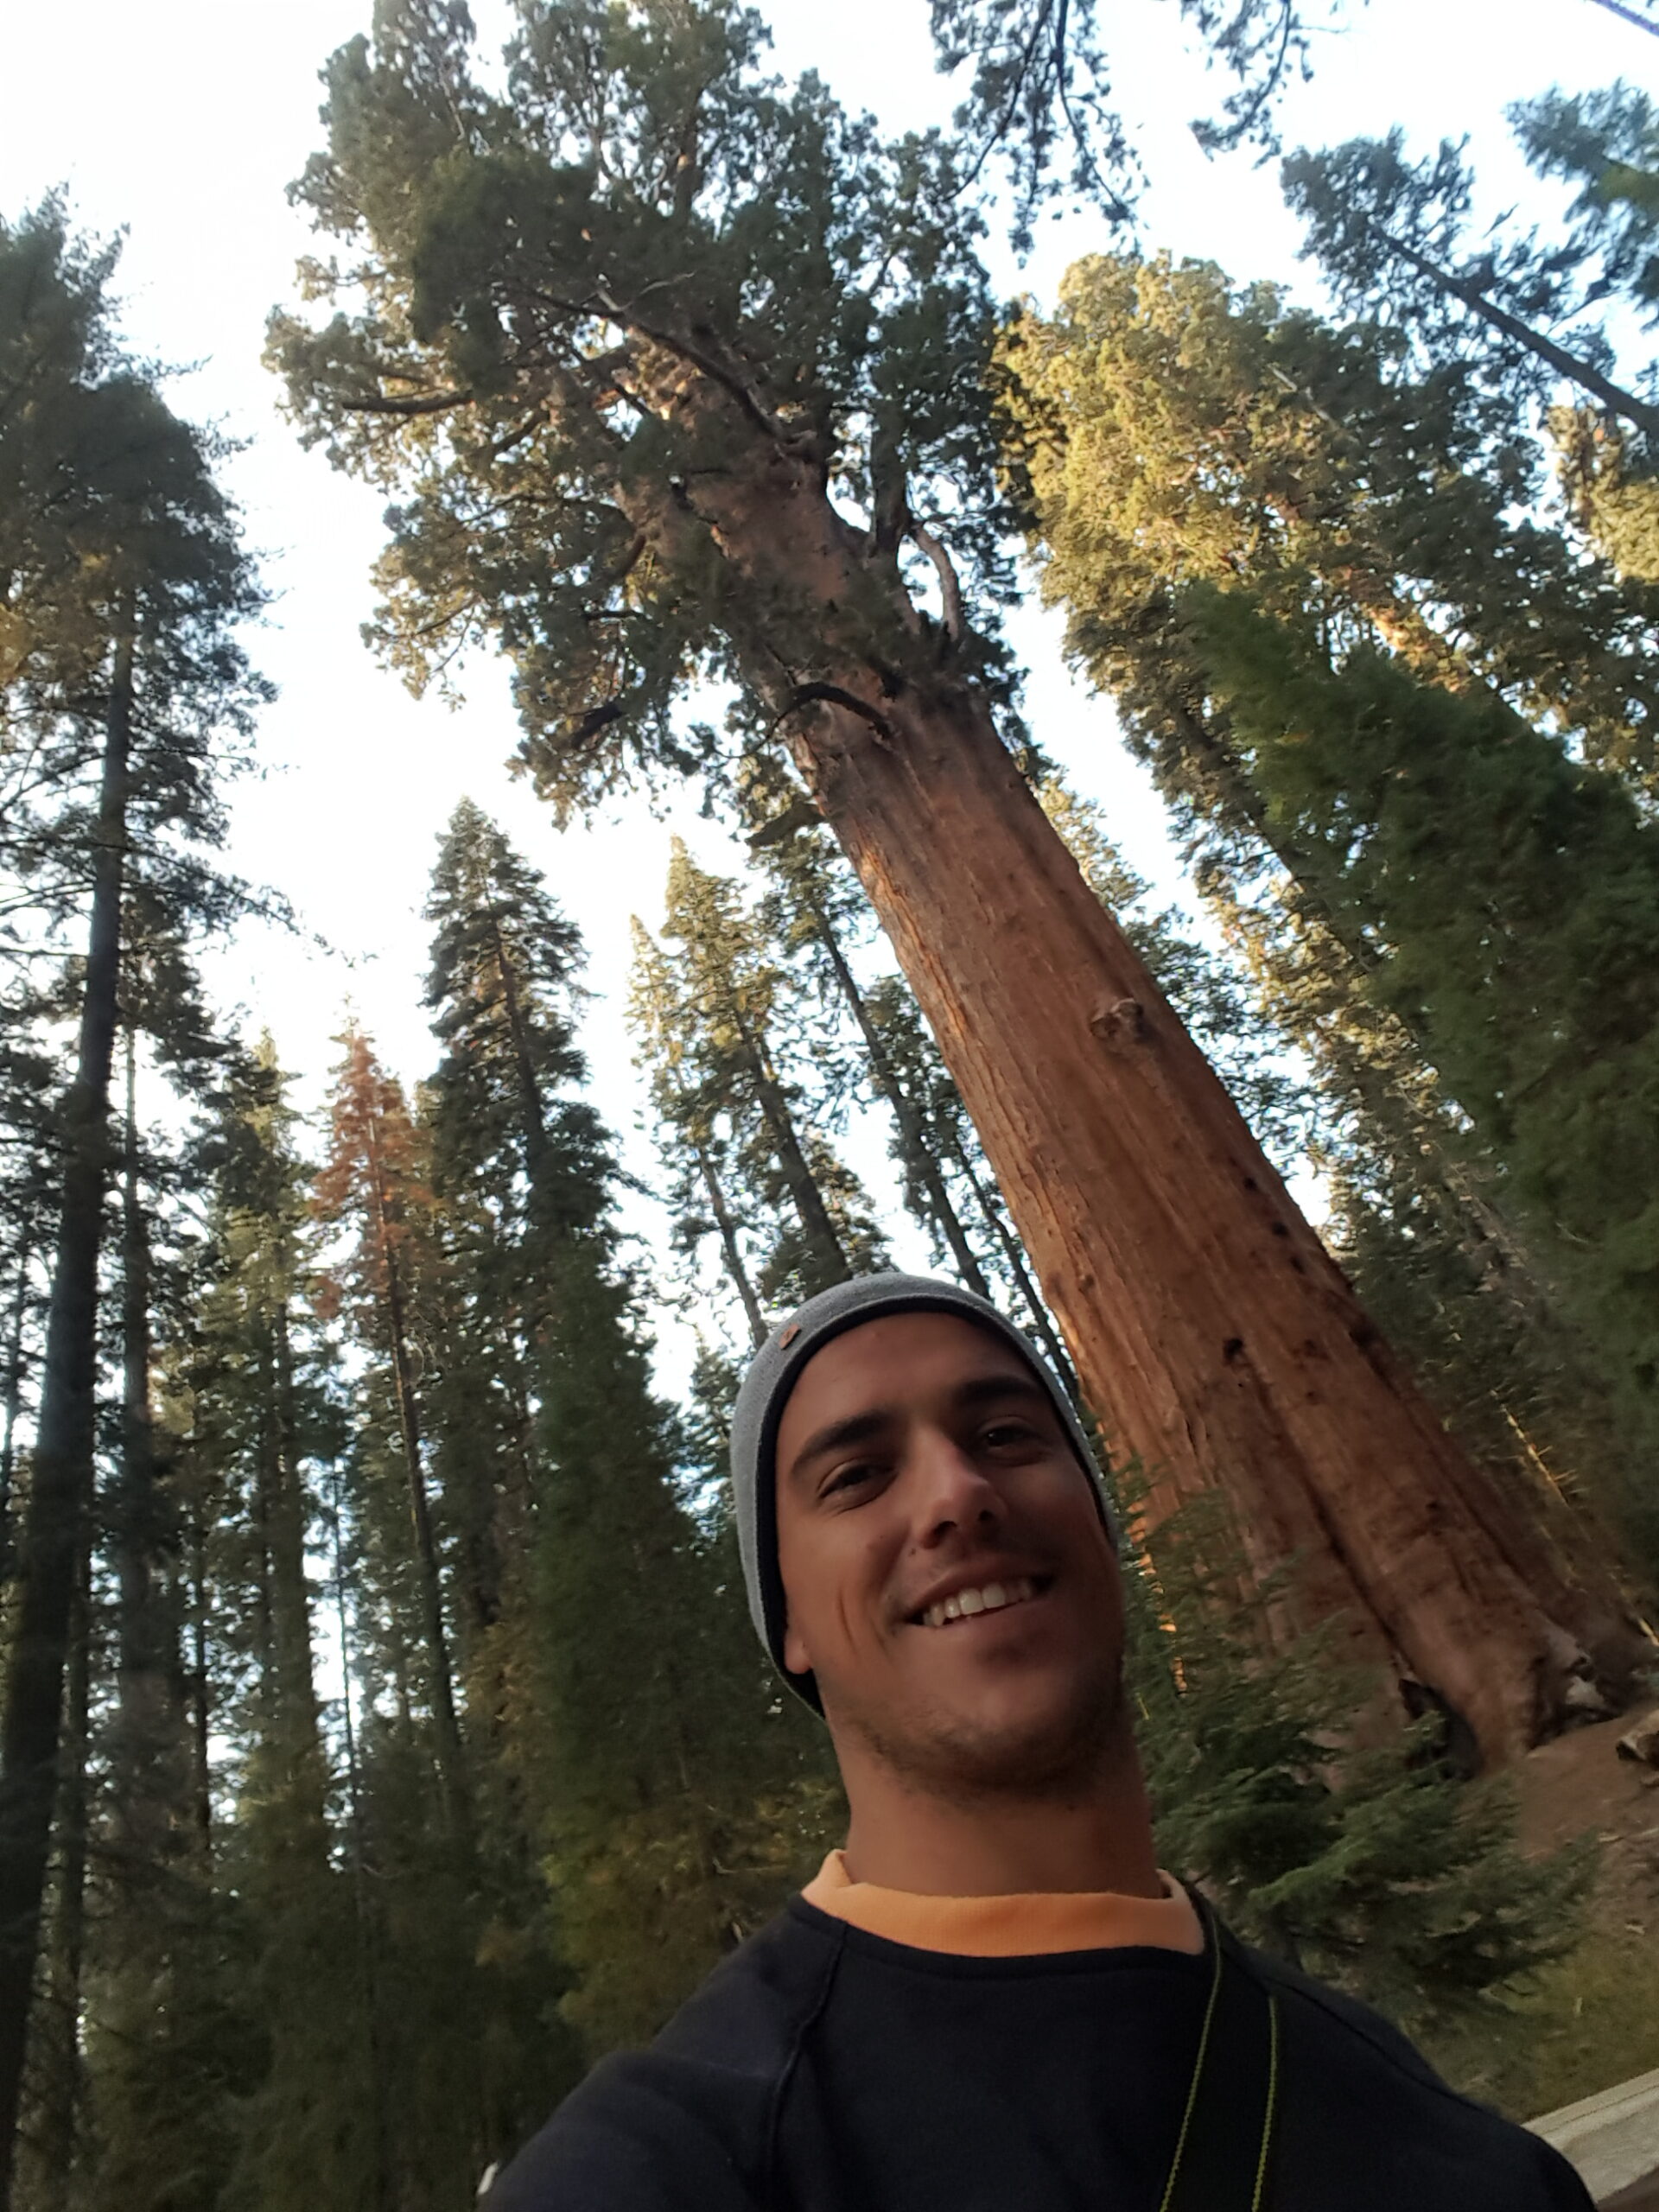 Sequoia National Park - Guia Completo

